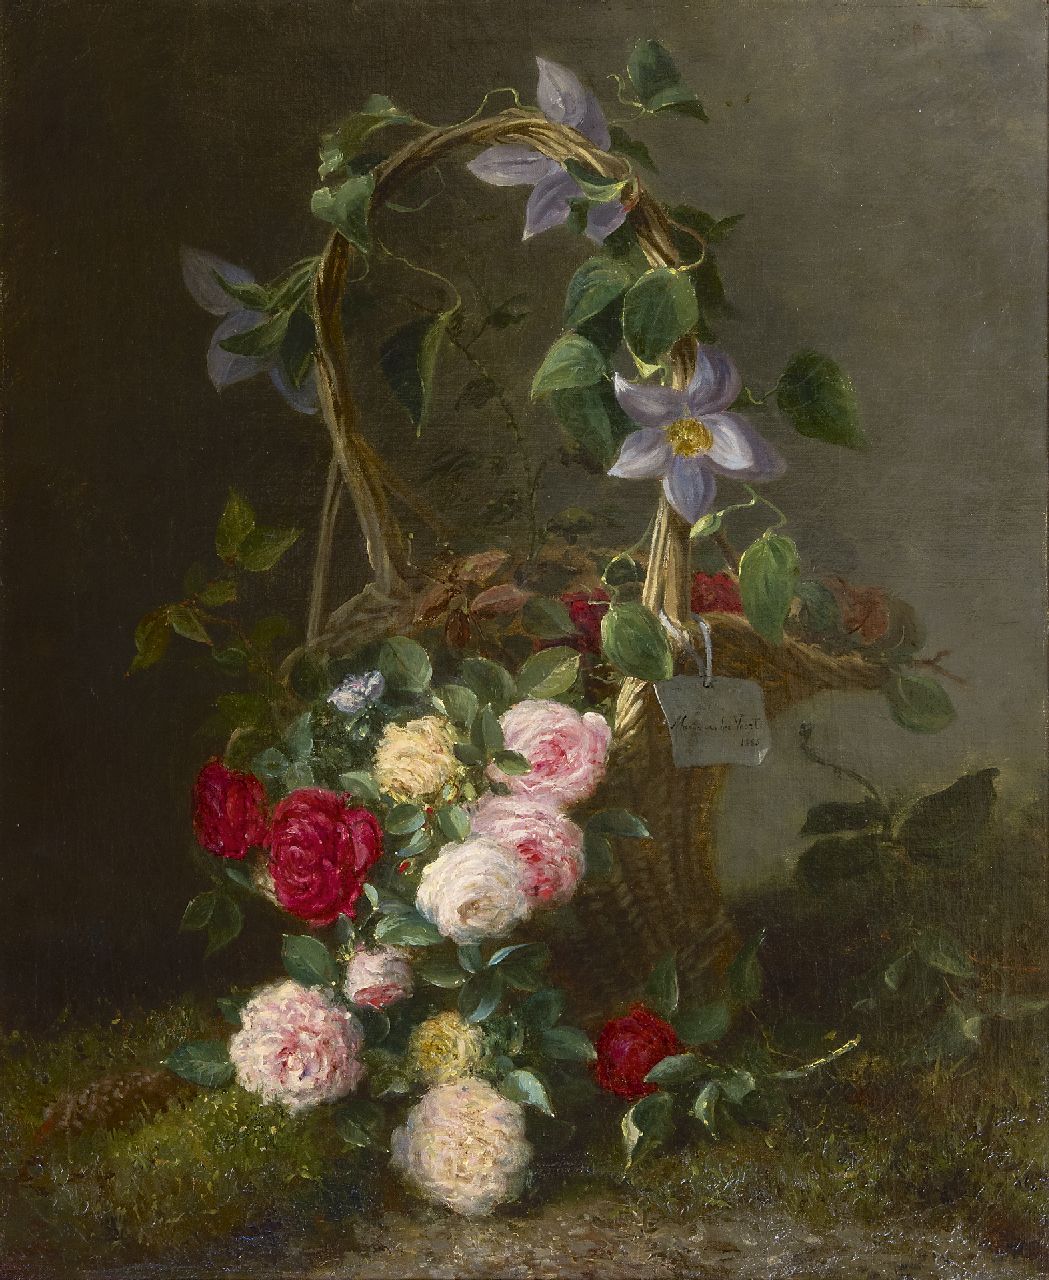 Voort in de Betouw-Nourney M. van der | Maria van der Voort in de Betouw-Nourney | Paintings offered for sale | Roses in an ornamental basket, oil on canvas 79.5 x 66.5 cm, signed c.r. on a painted label and dated 1885